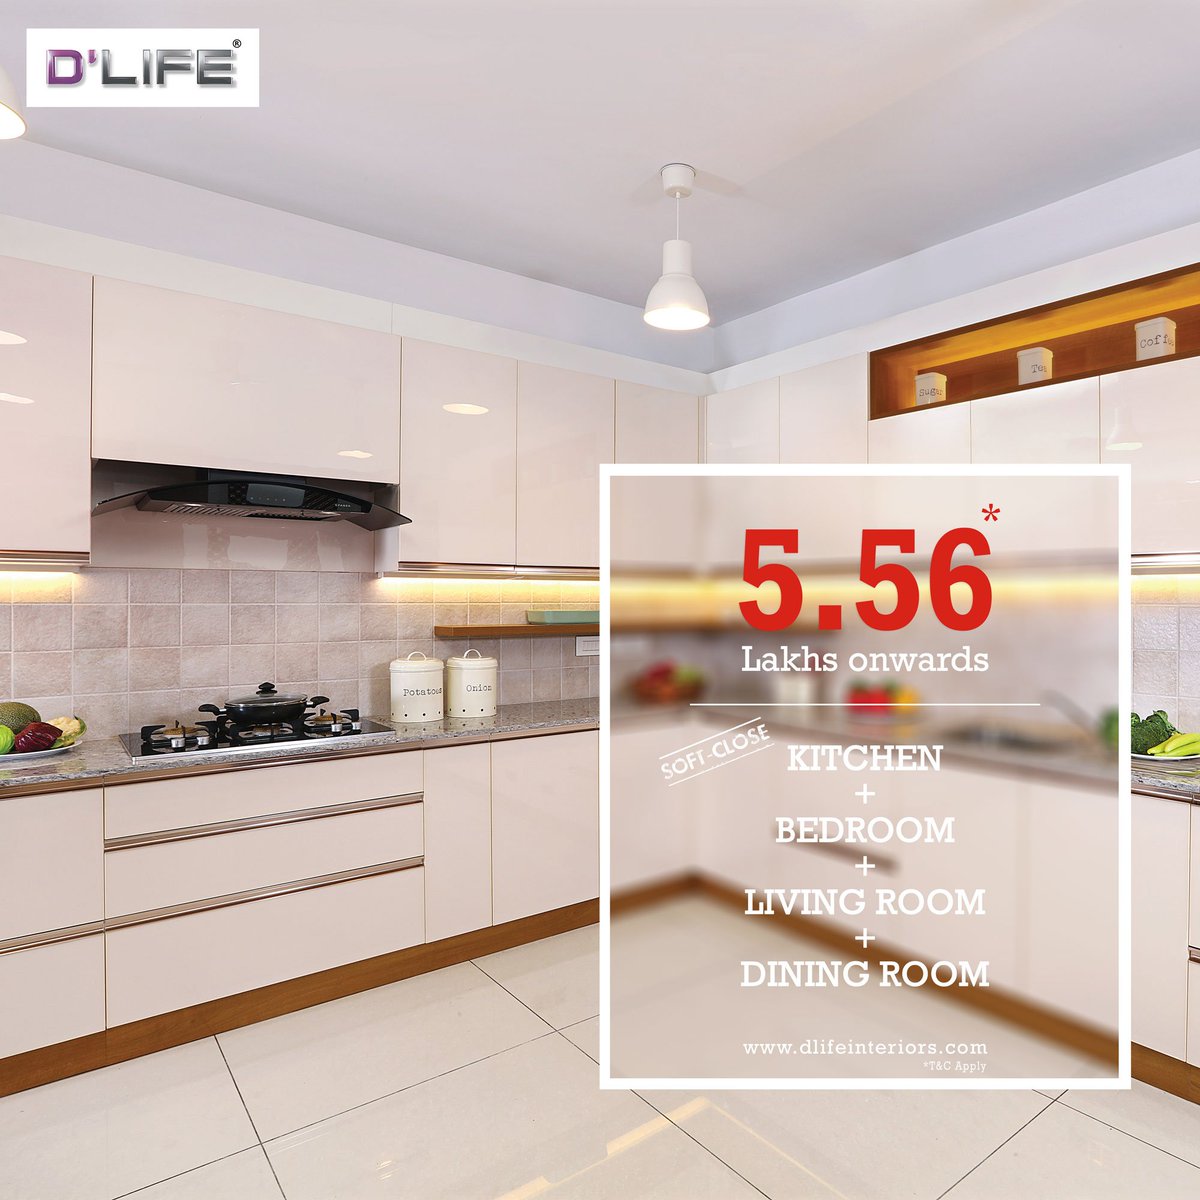 Dlife Home Interiors On Twitter Are You Looking For A